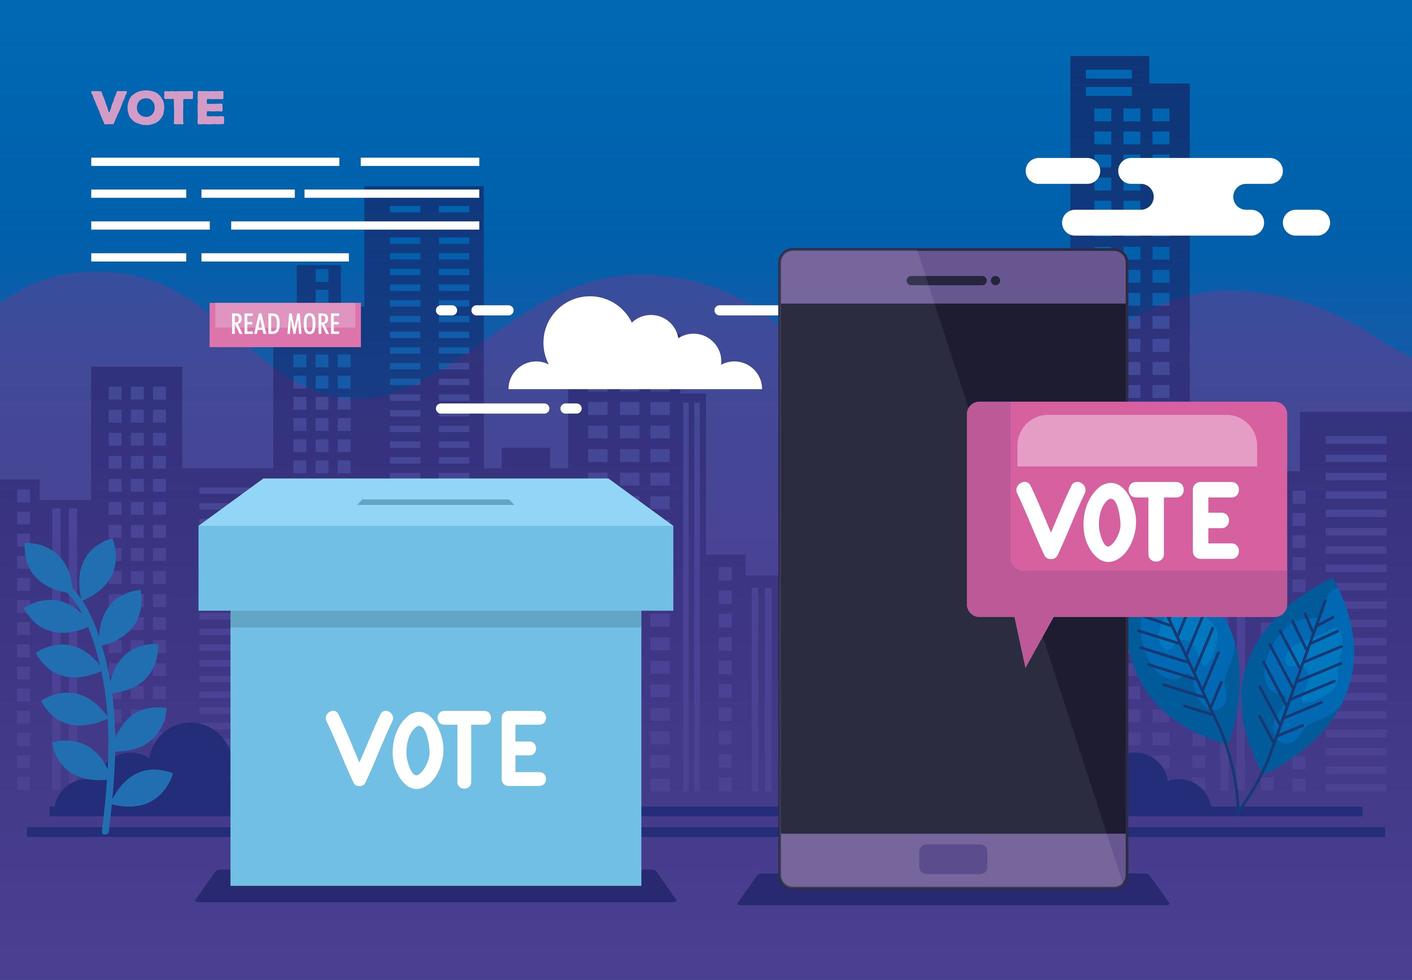 poster of vote online with smartphone and icons vector